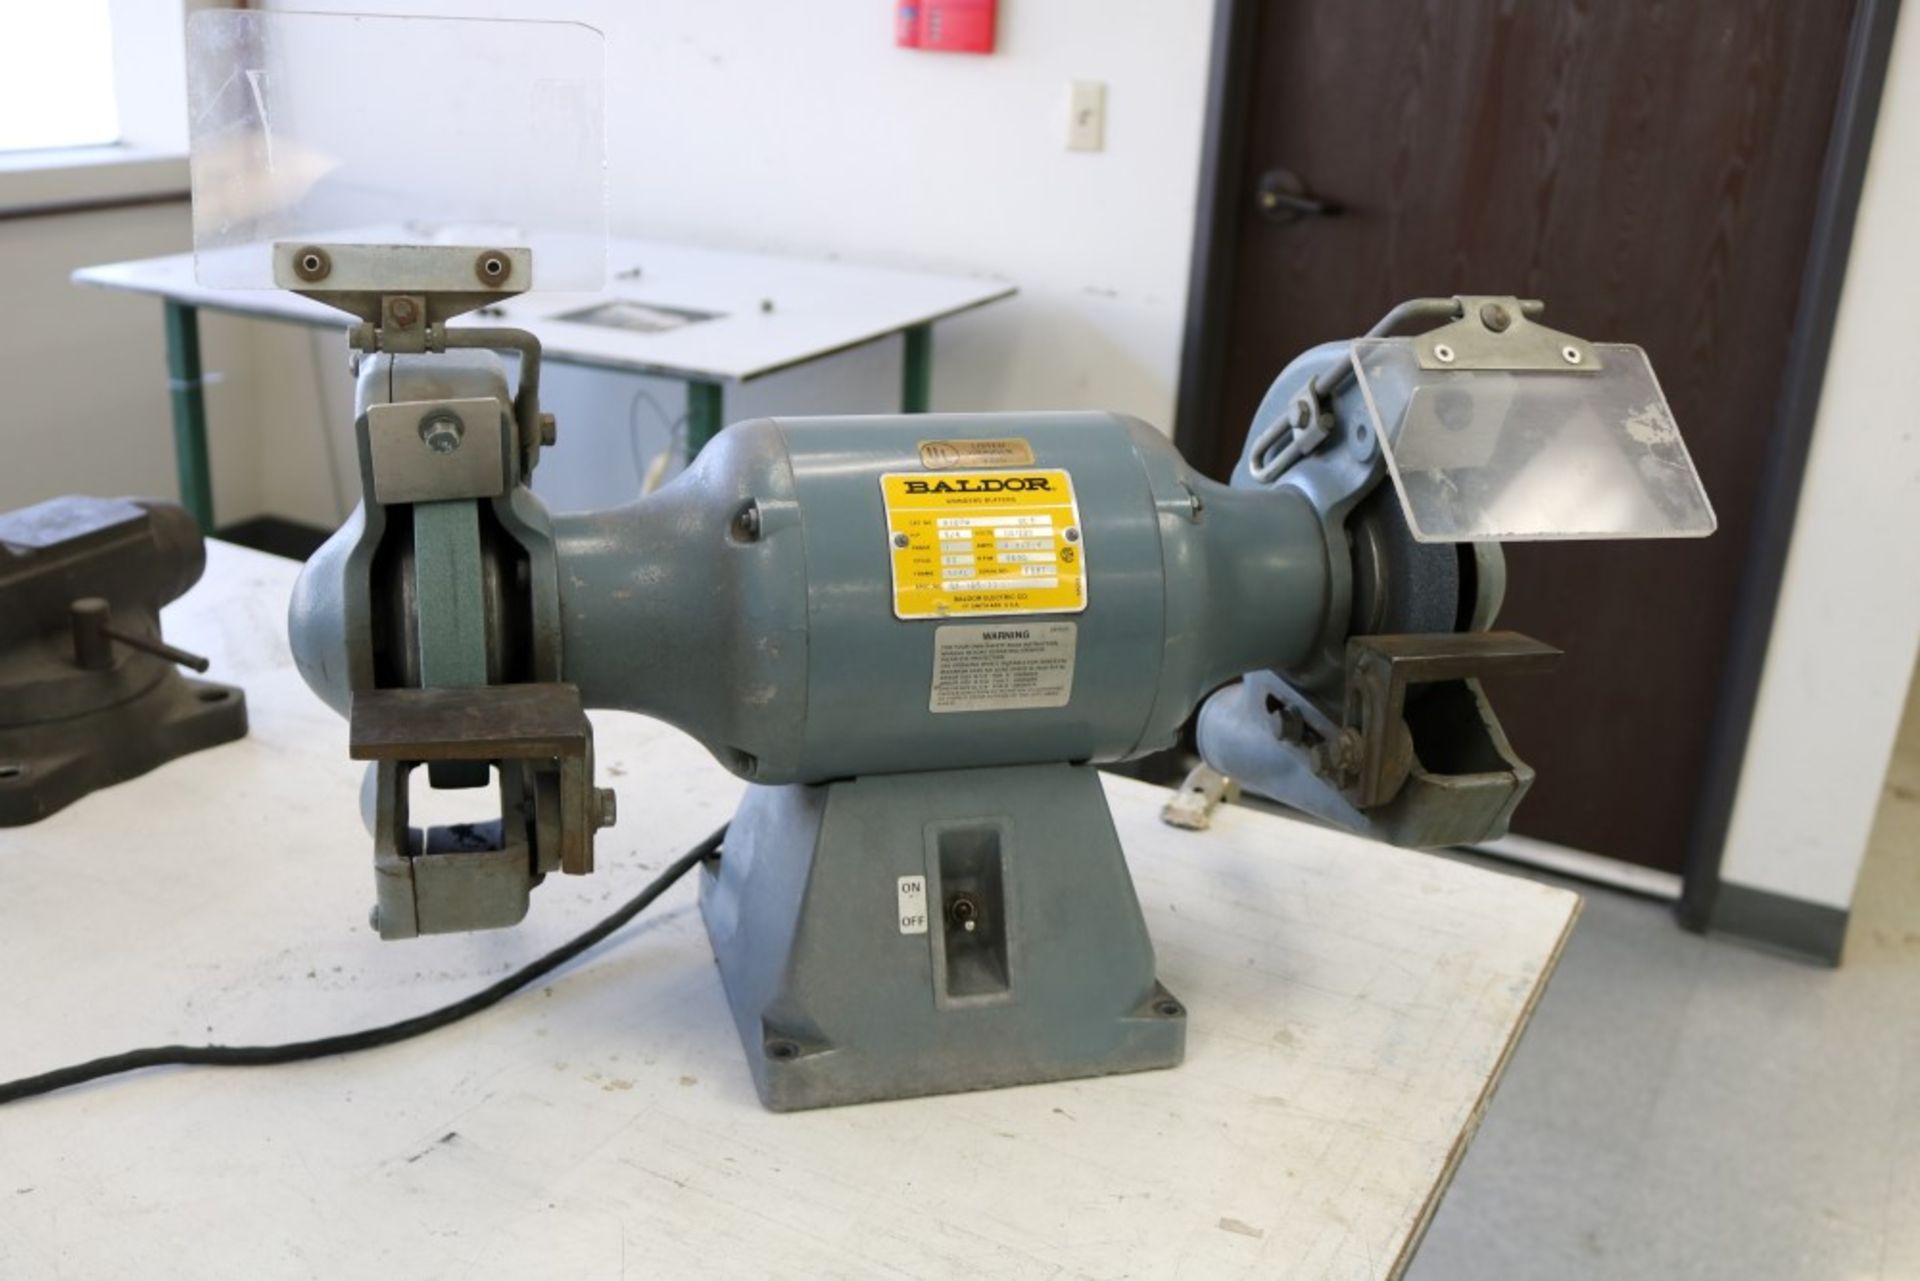 Baldor Grinder/Buffer 3/4 HP, 3600 RPM, with Grinding Wheels Attached